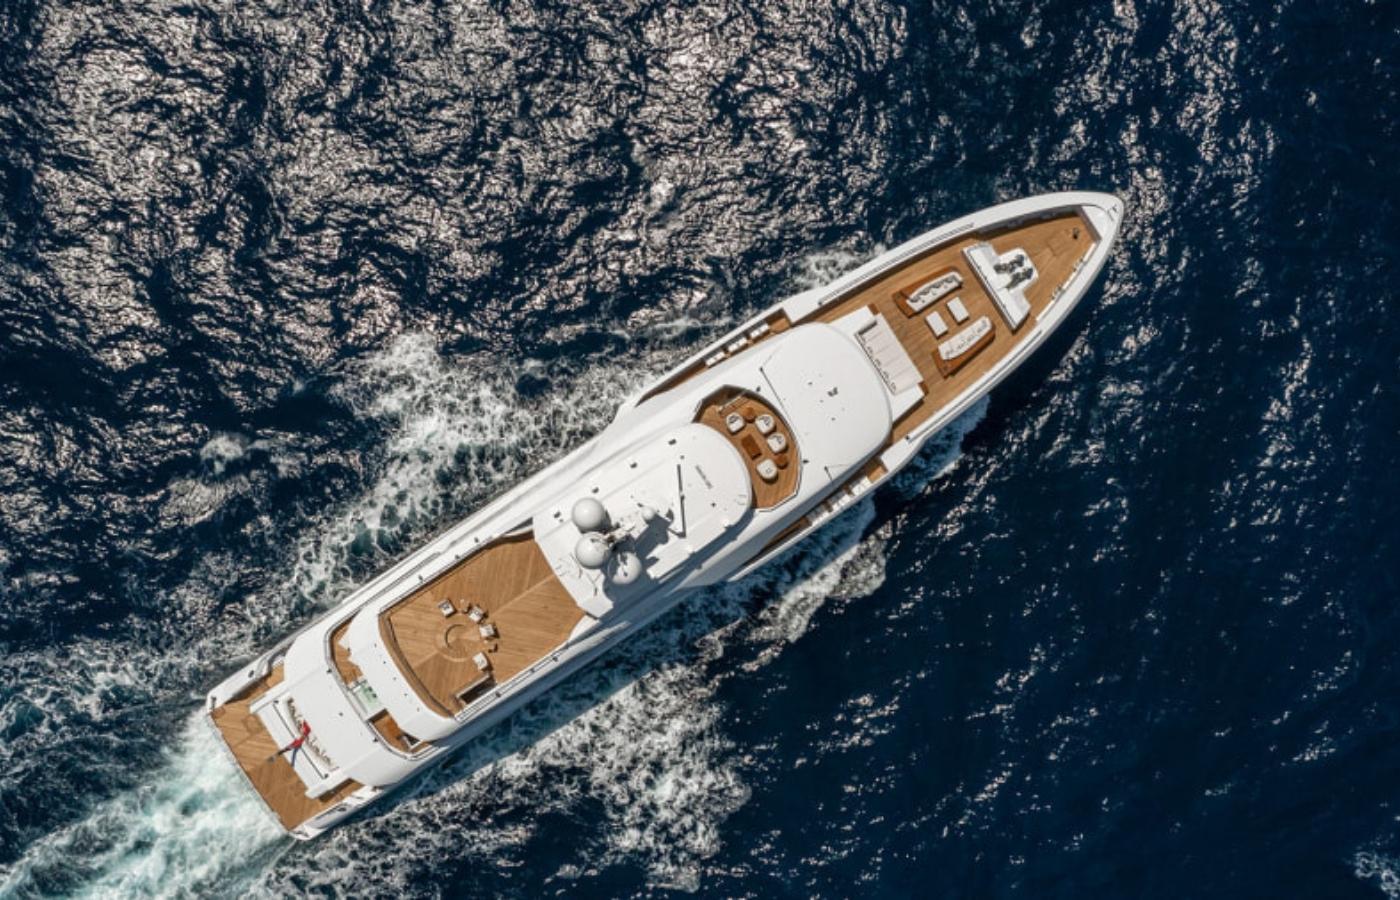 Amid global turmoil, superyachts are selling more than ever. Here’s why [In the News]